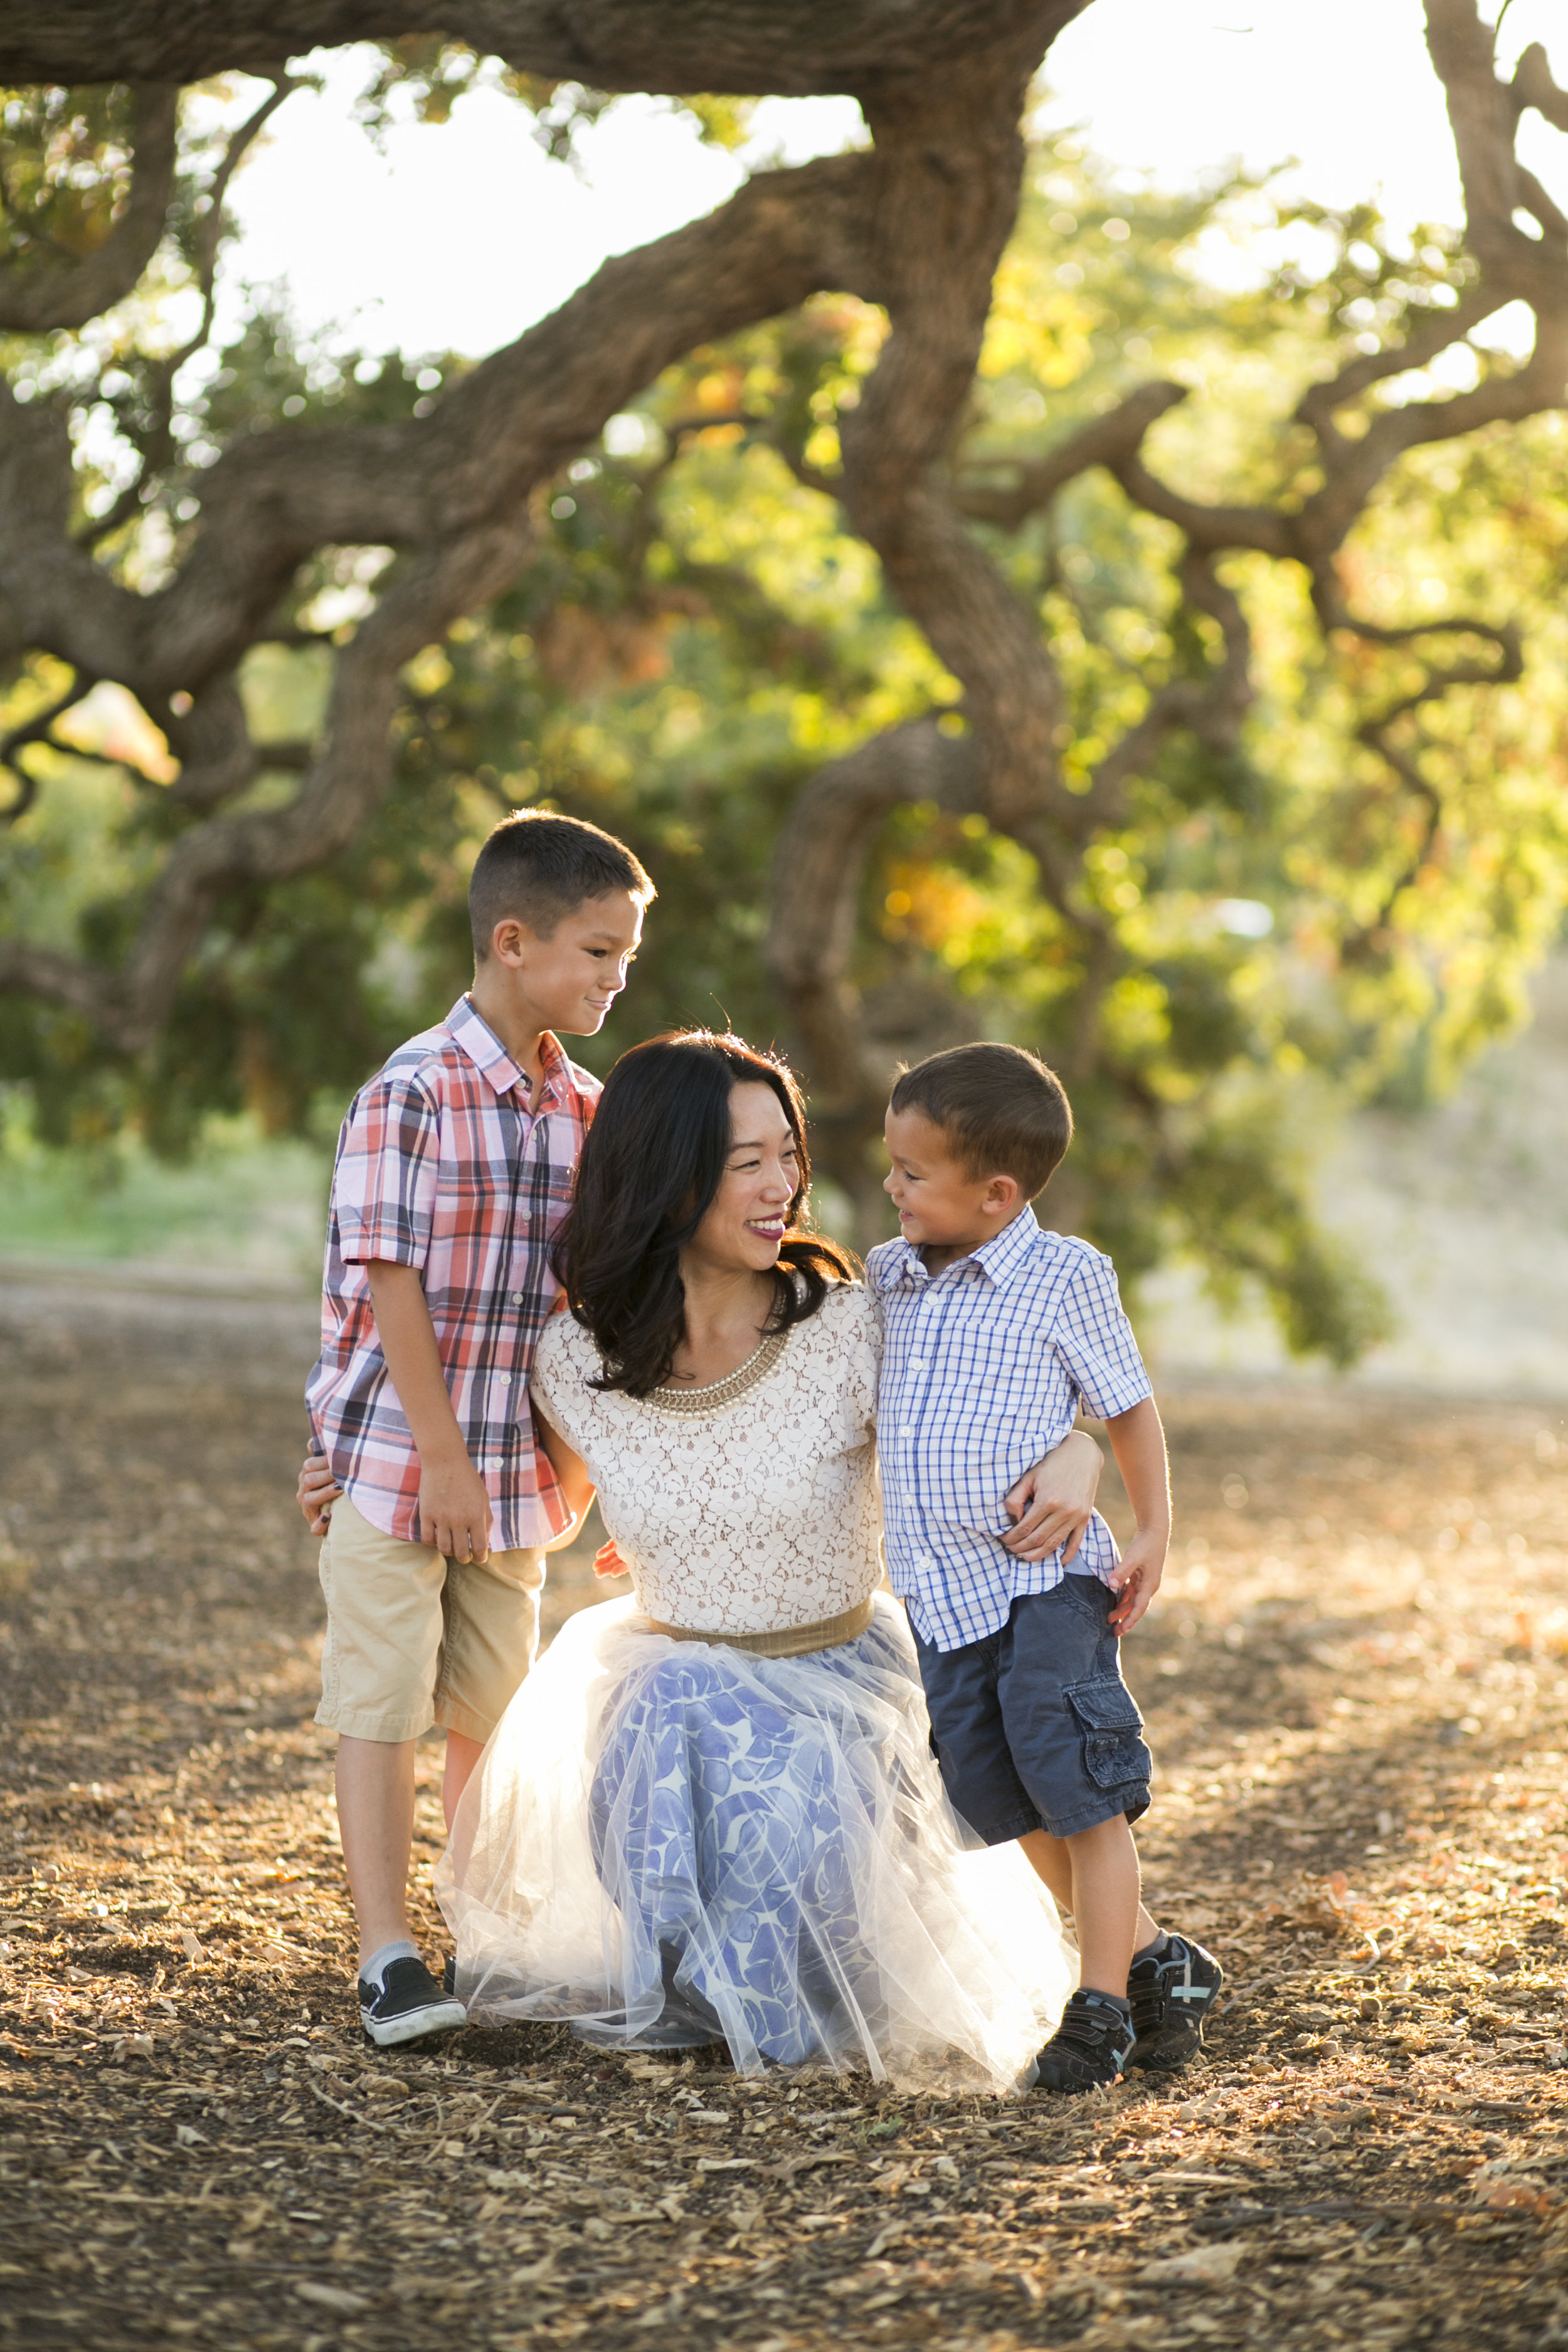 Bre Thurston Photography | San Francisco Bay Area Family Lifestyle Photographer | Outdoors on location with mom and her two sweet boys